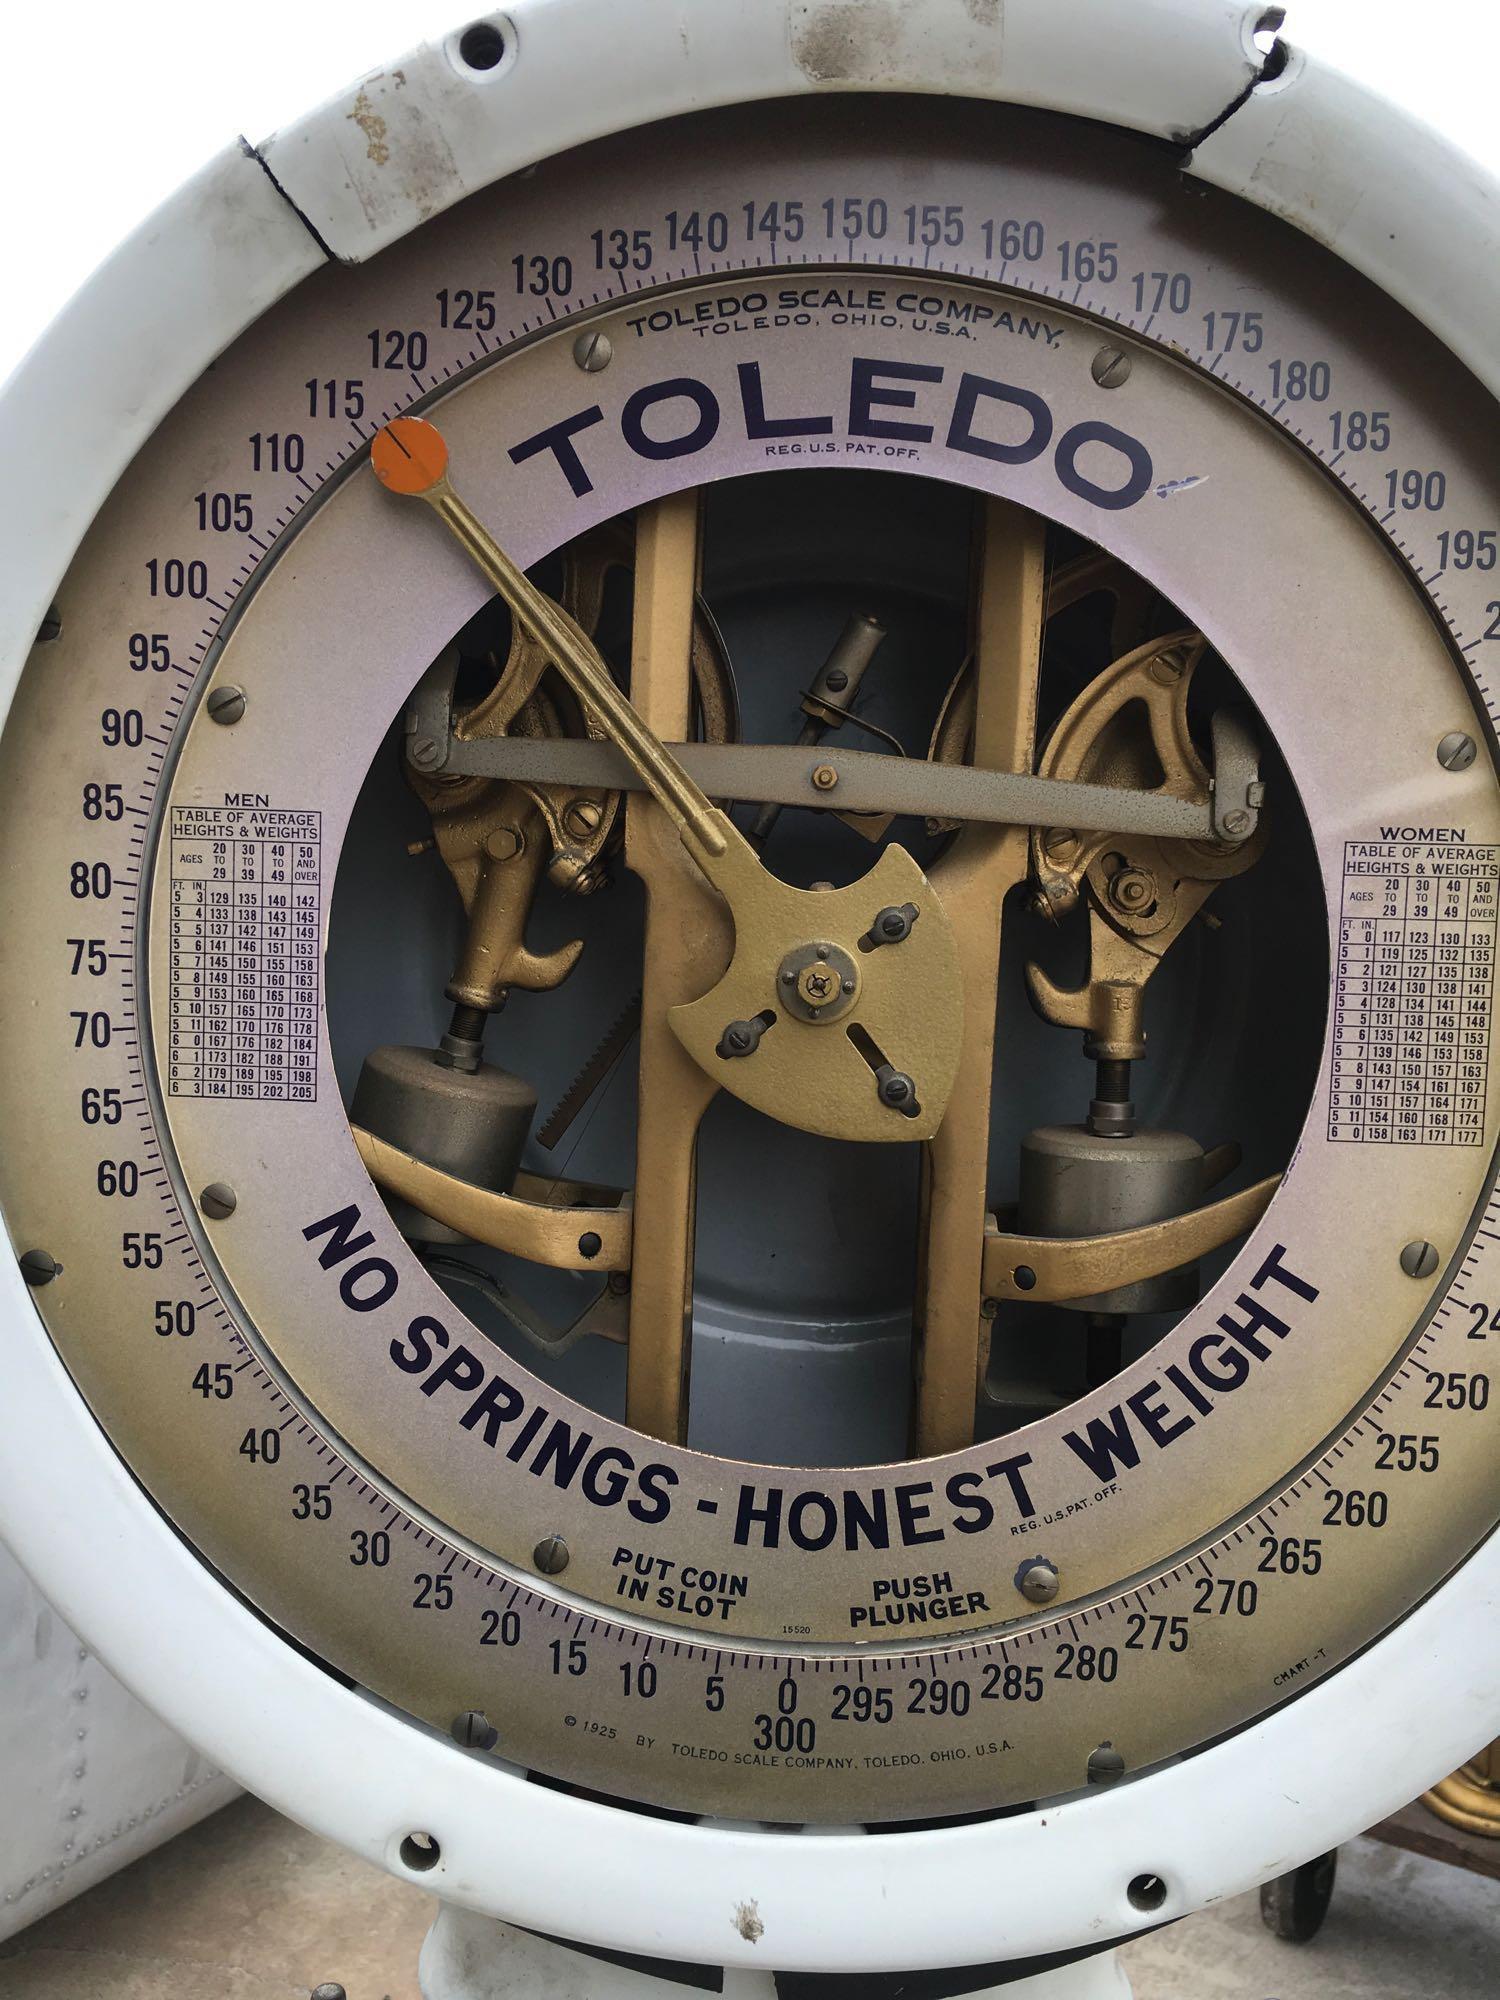 Vintage Toledo automatic no springs scale. Needs parts and has wear and tear. See pics